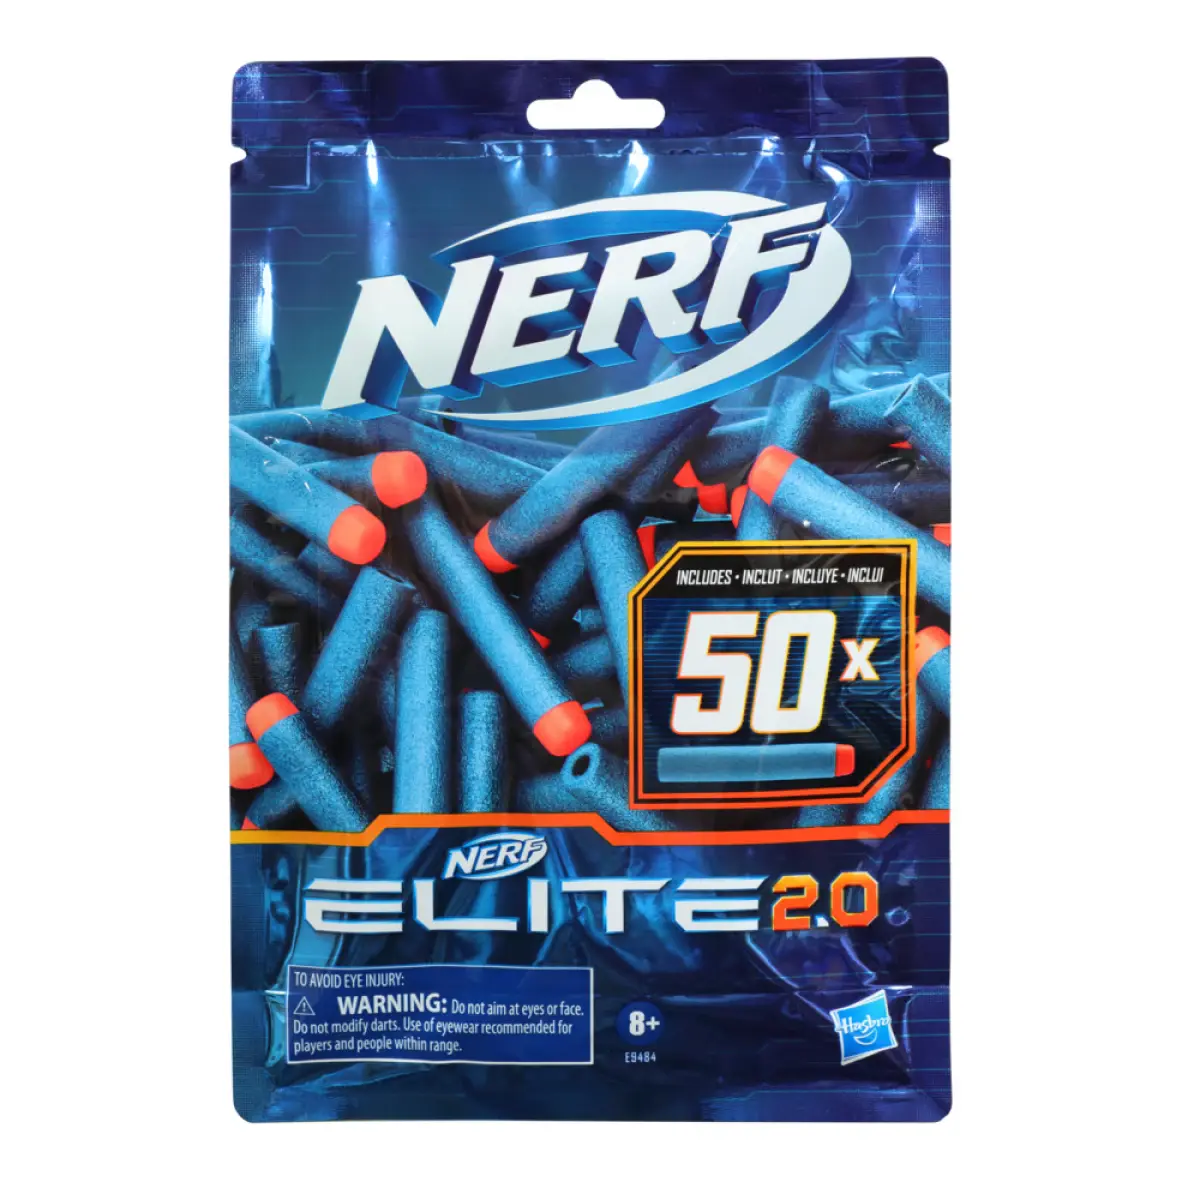 Nerf Elite 2.0 Dart Refill, 50 Nerf Elite Darts, Compatible With All Nerf Blasters That Use Elite Darts, Kids Outdoor Games, 8Yrs+